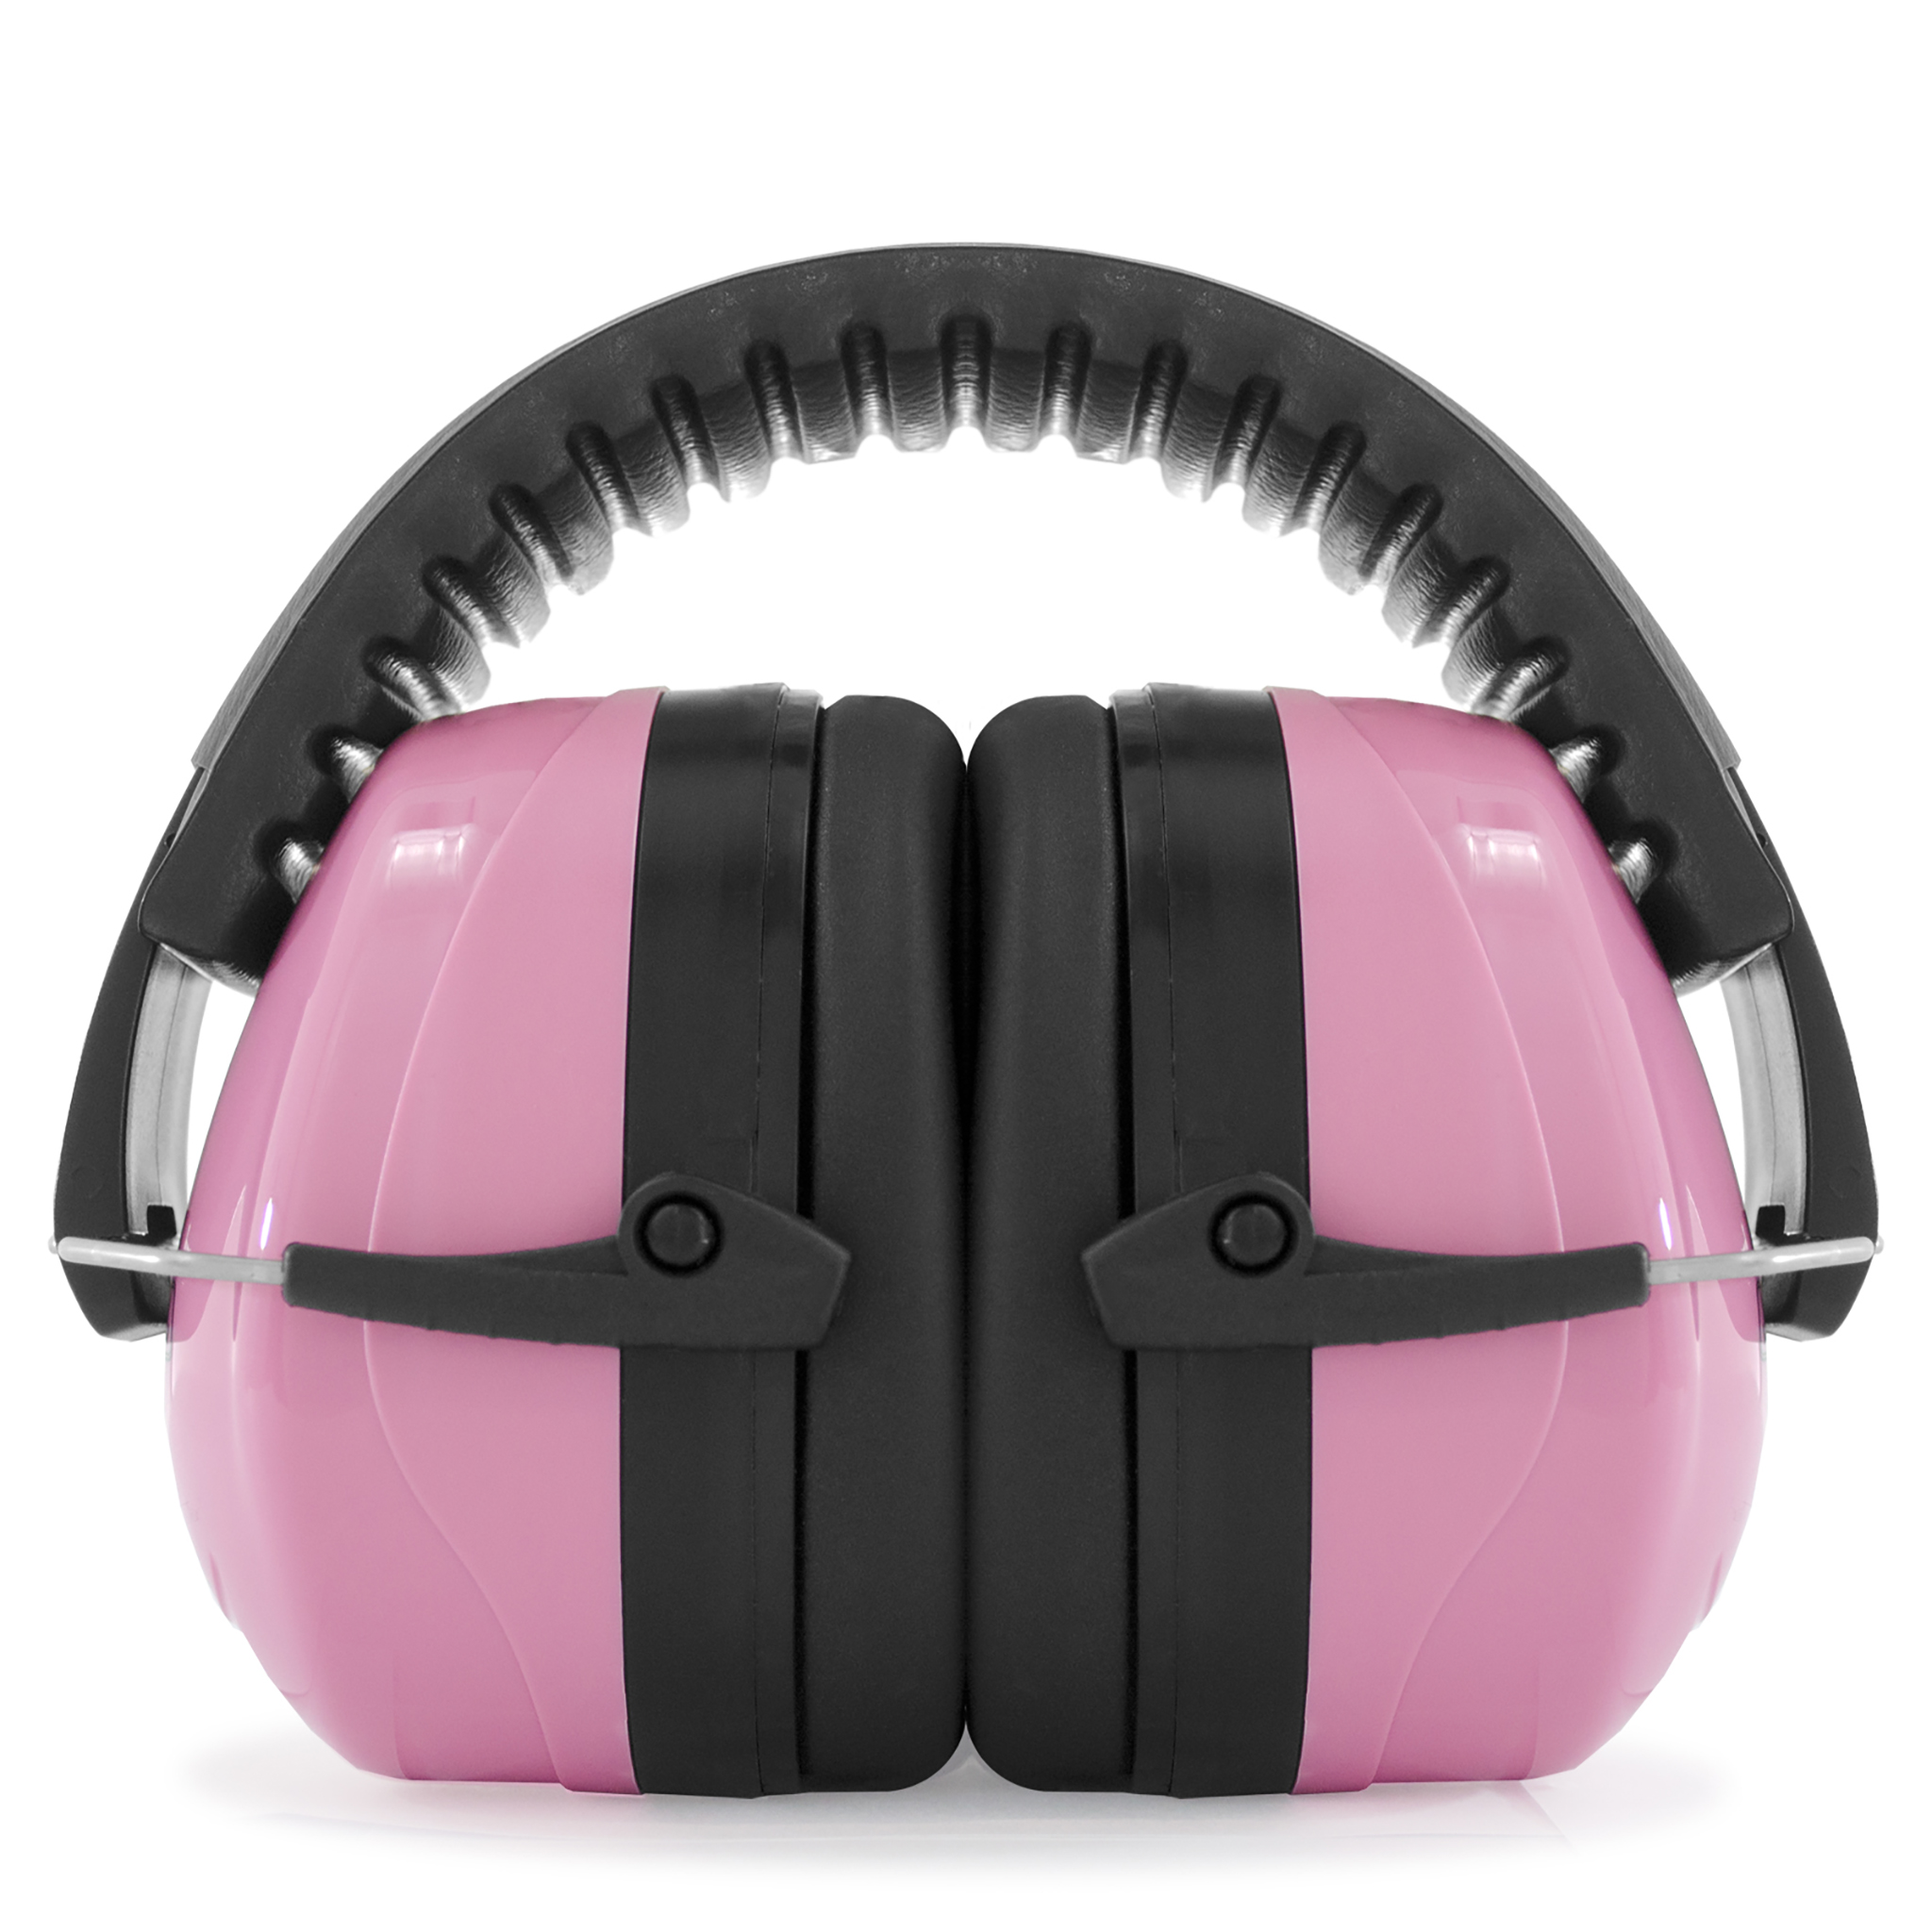 100 % Qualität Sound Suppressing Hearing Protection NRR:23dB – for ANSI Safety Earmuffs Technopack Corporation 